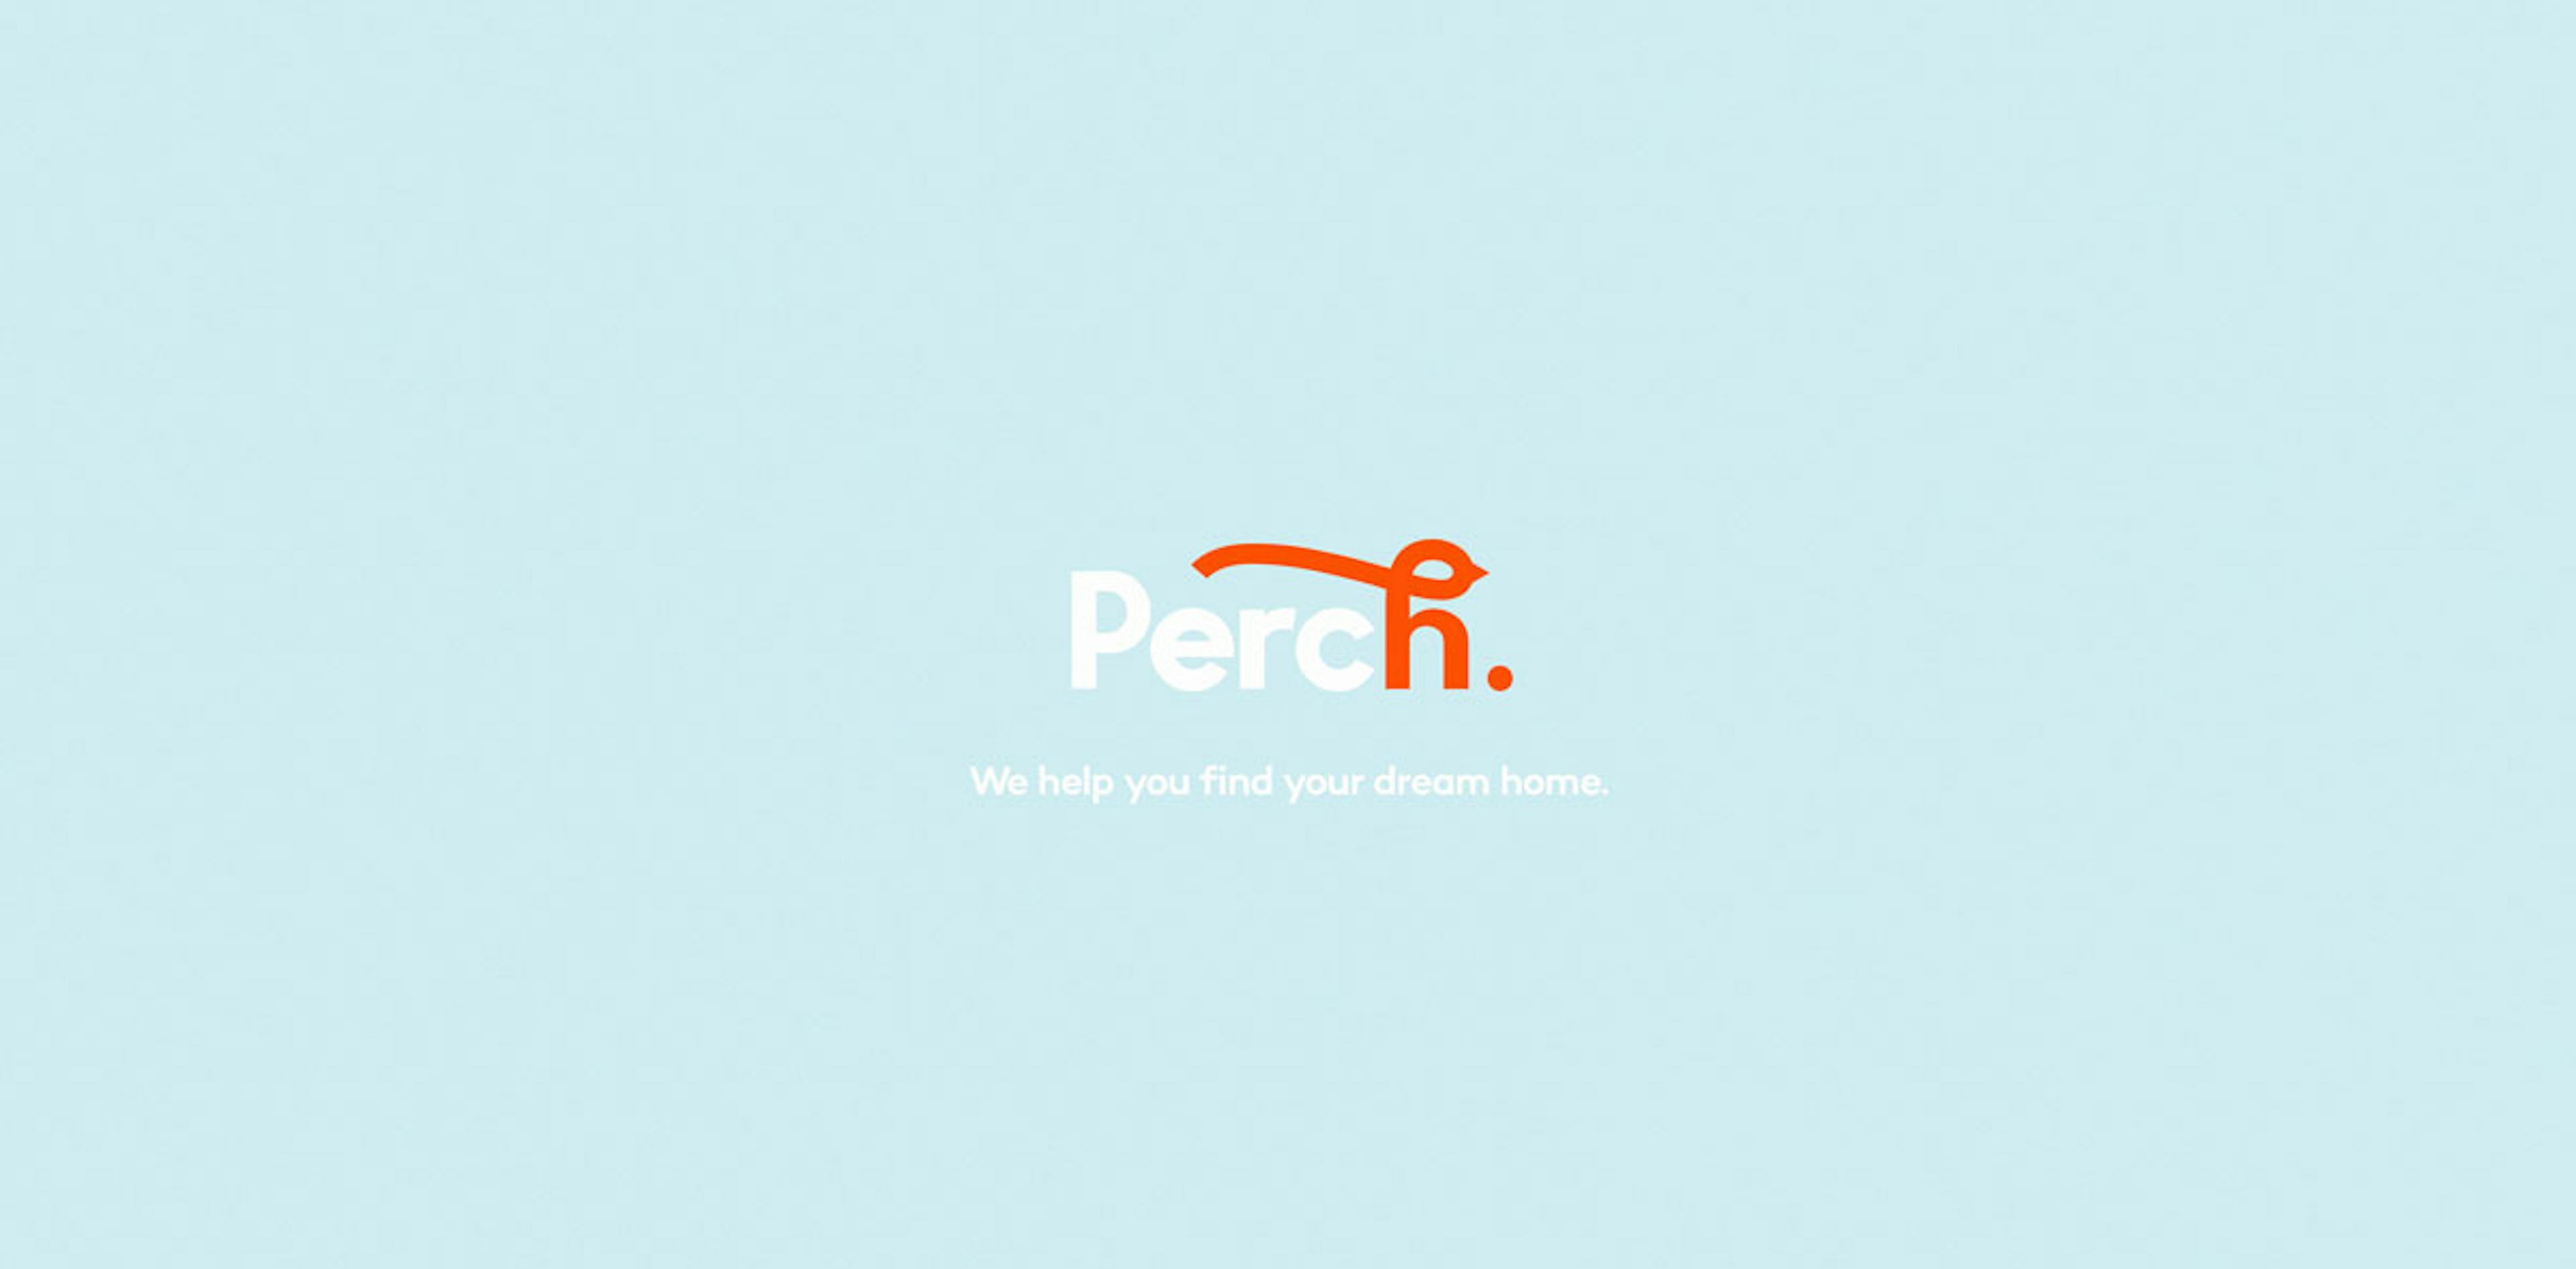 Perch Logo Designed By The Uptown Agency